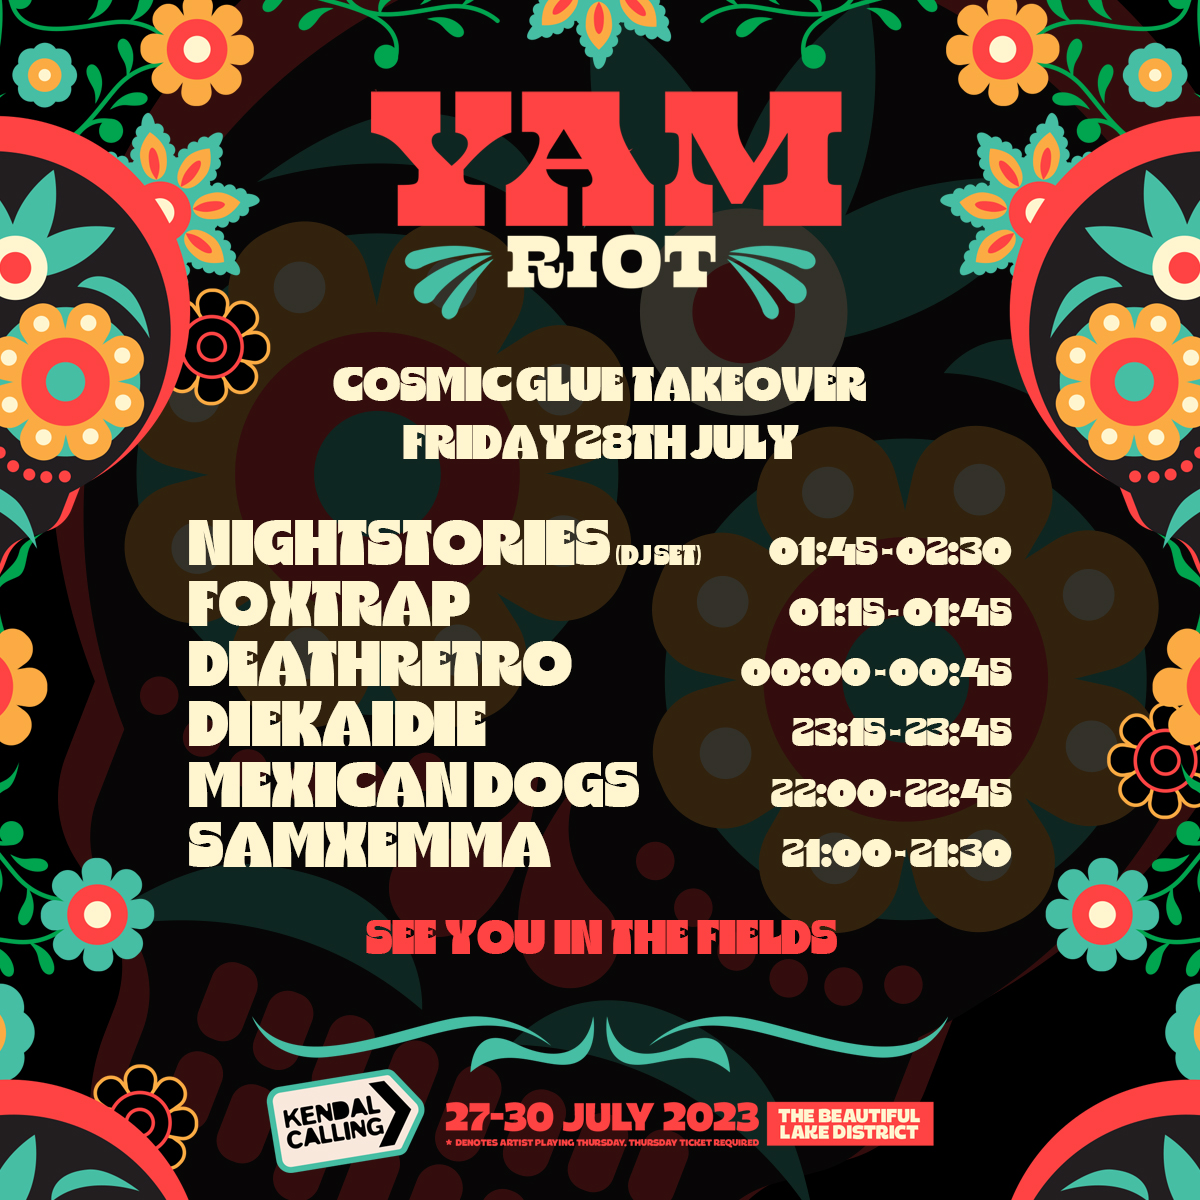 YAM Riot who's ready!!! 

Kendal Calling 2023 has officially landed. Catch us at YAM Riot tomorrow night from 00:00. 🙌

We'll be joined alongside @FOXTRAPBAND, @DieKaiDie, @MexDogsOfficial, SAMXEMMA & Nightstories. 👌